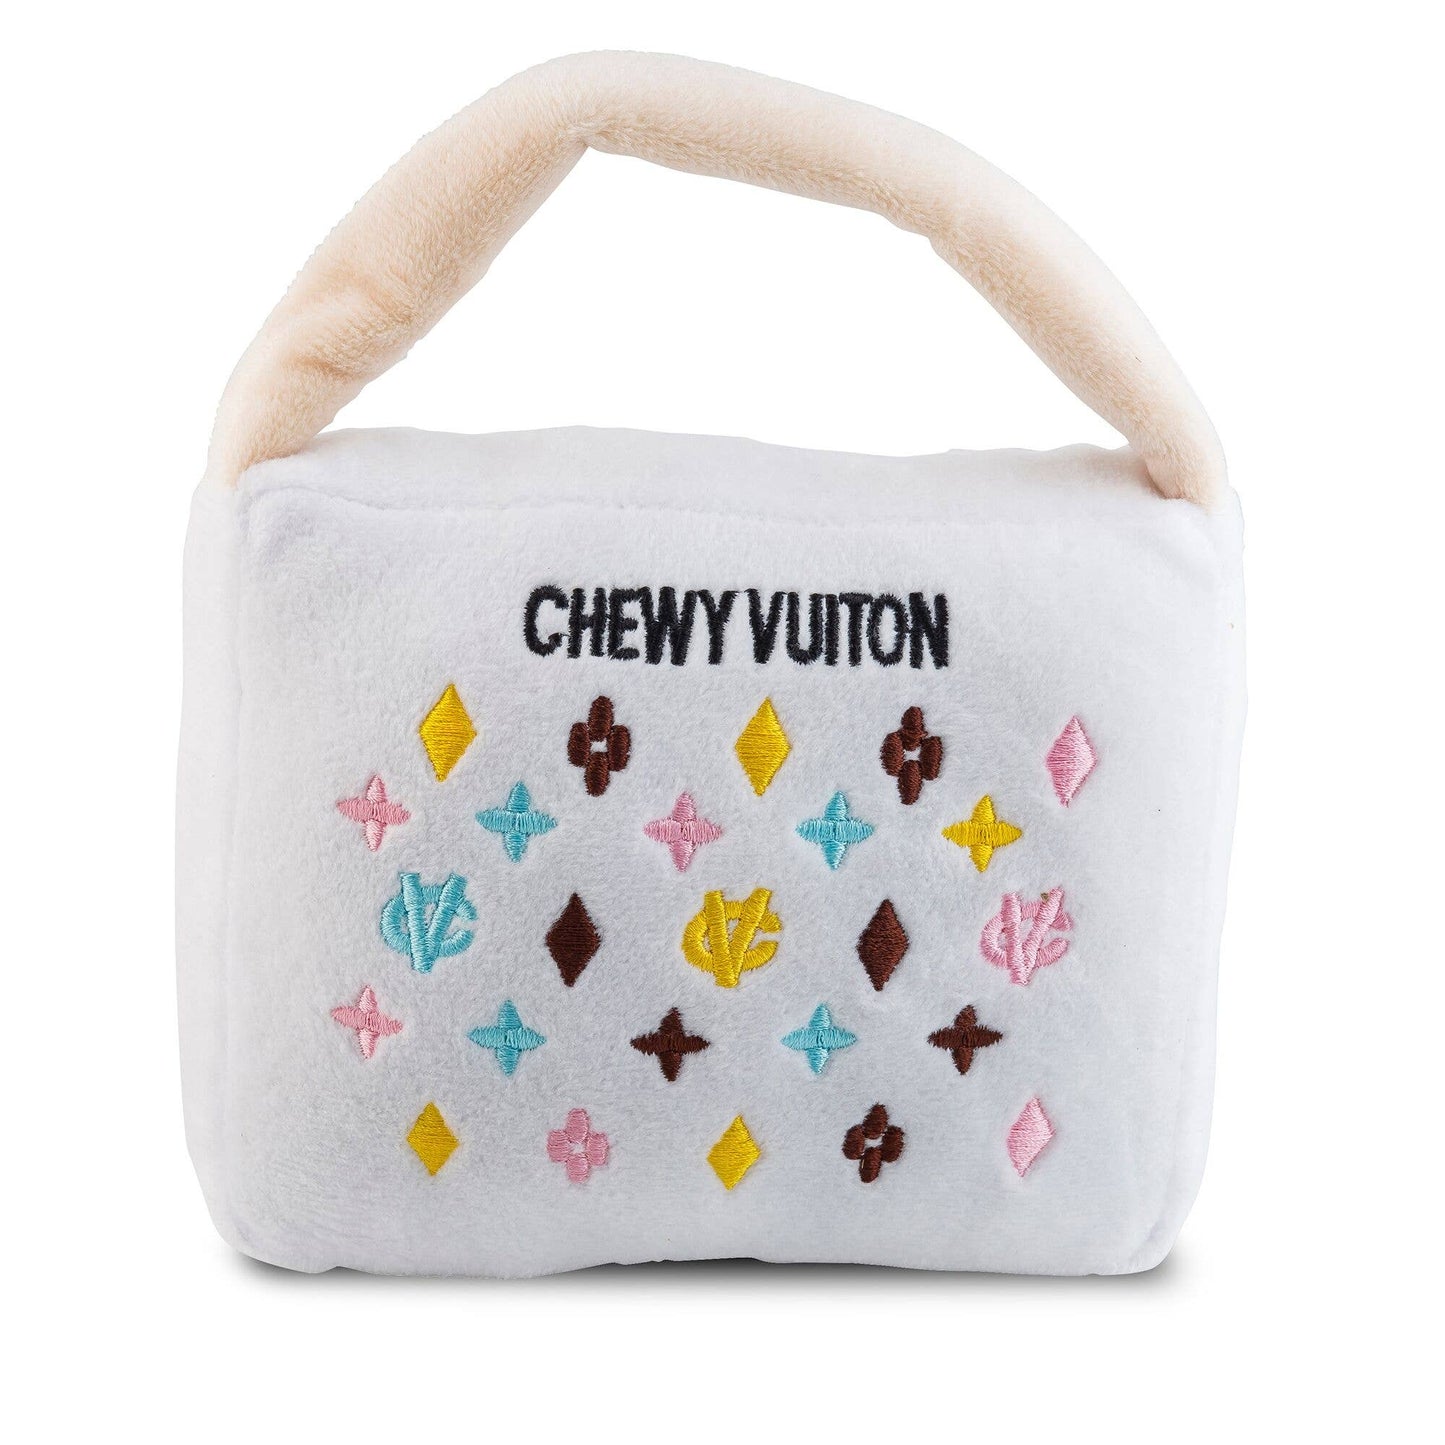 Haute Diggity Dog - White Chewy Vuiton Purses: Large  Image